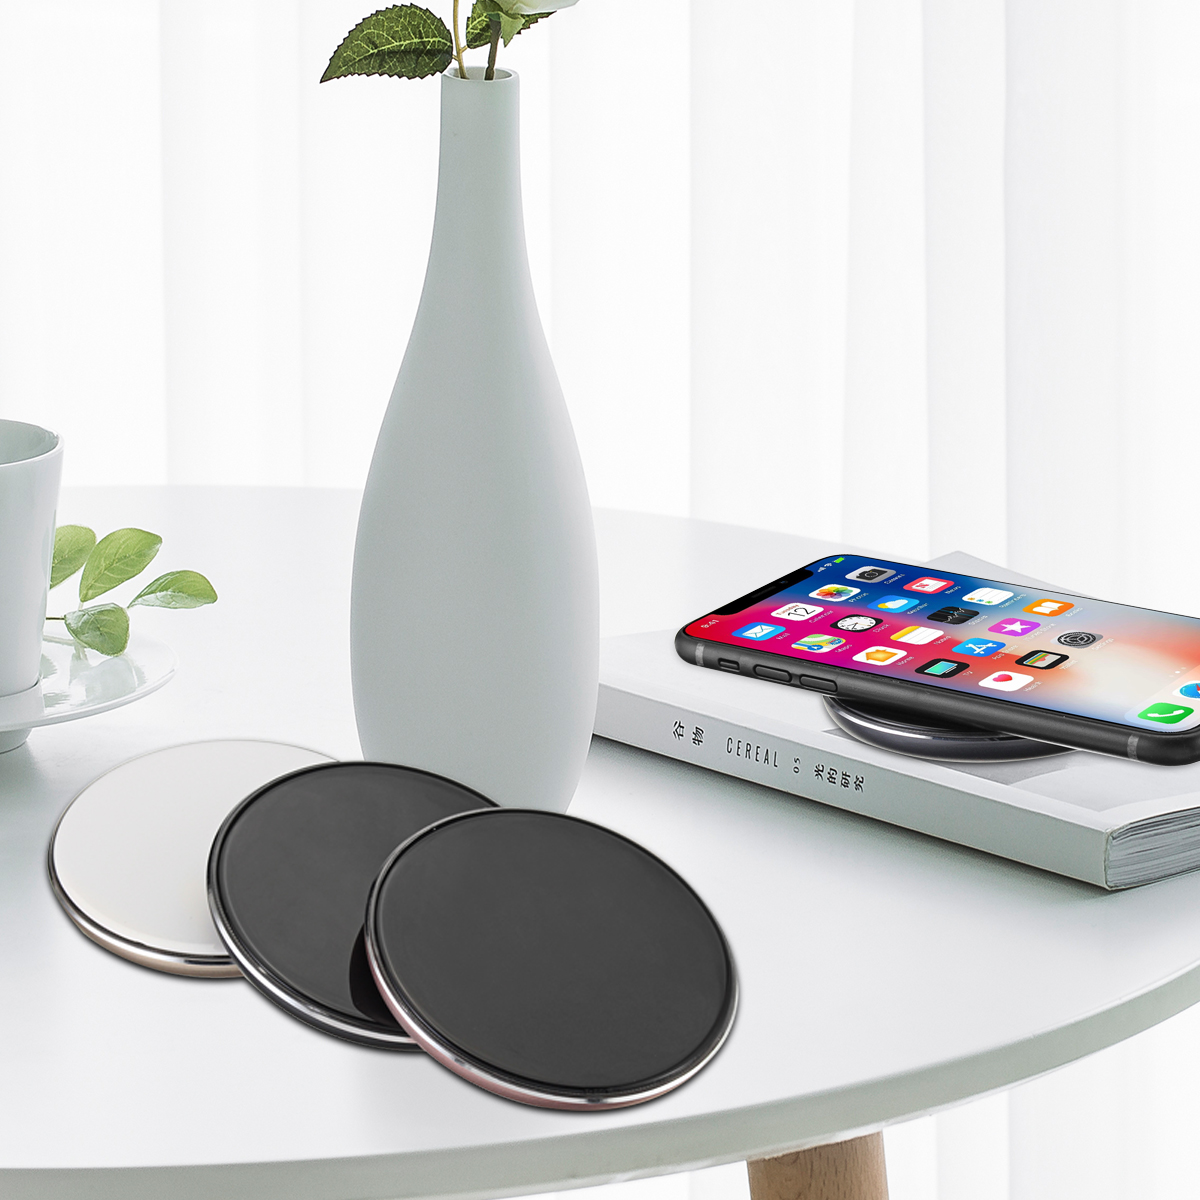 Bakeey Qi Wireless Charger With LED Light For iPhone X 8 8Plus Samsung S8 S7 Edge Note 8